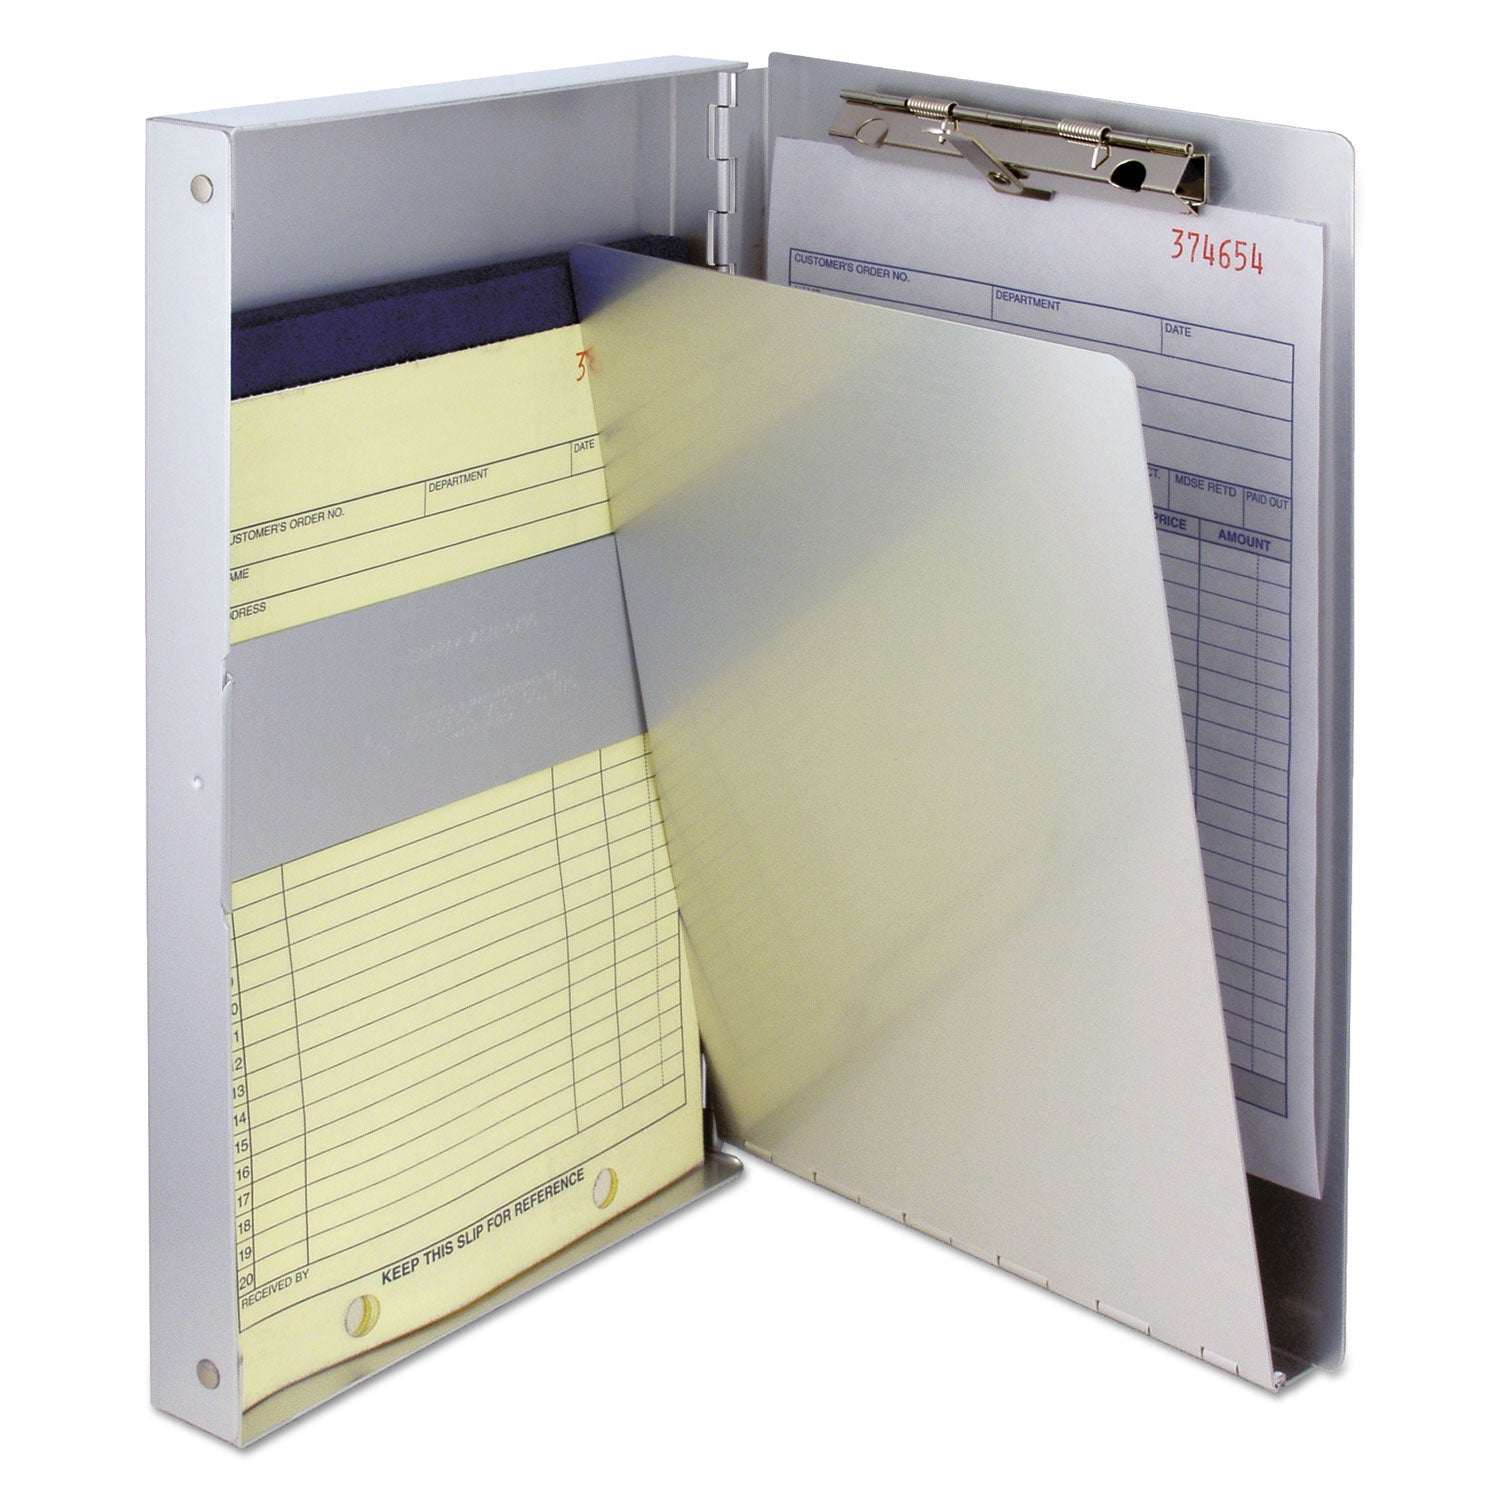 Snapak Aluminum Side-Open Forms Folder, 0.38" Clip Capacity, Holds 5 x 9 Sheets, Silver - 